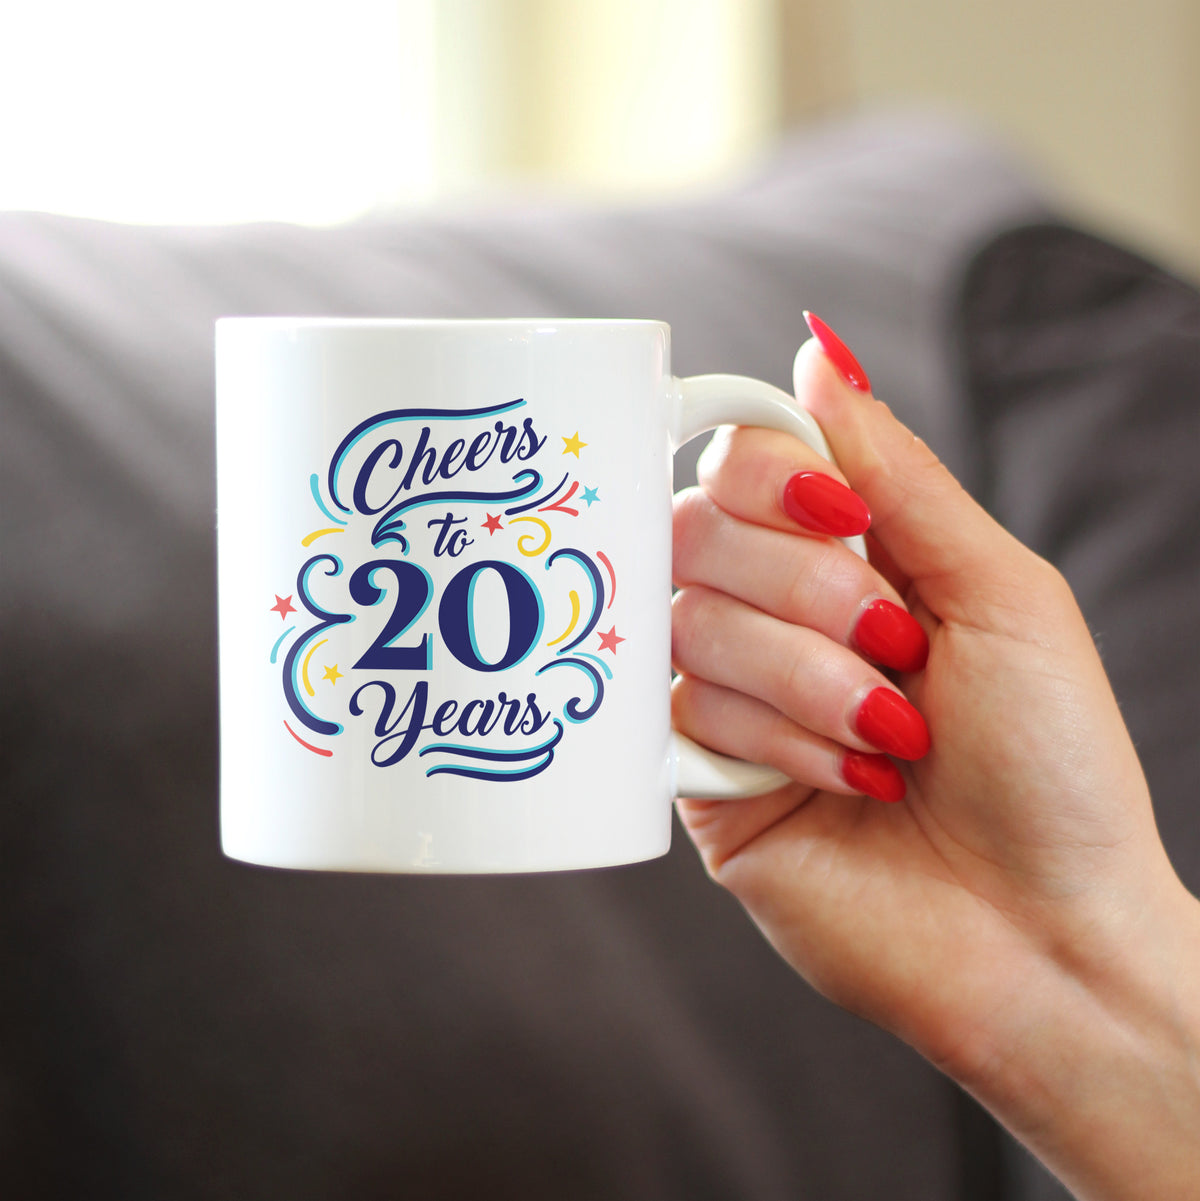 Cheers to 20 Years - Coffee Mug Gifts for Women &amp; Men - 20th Anniversary Party Decor